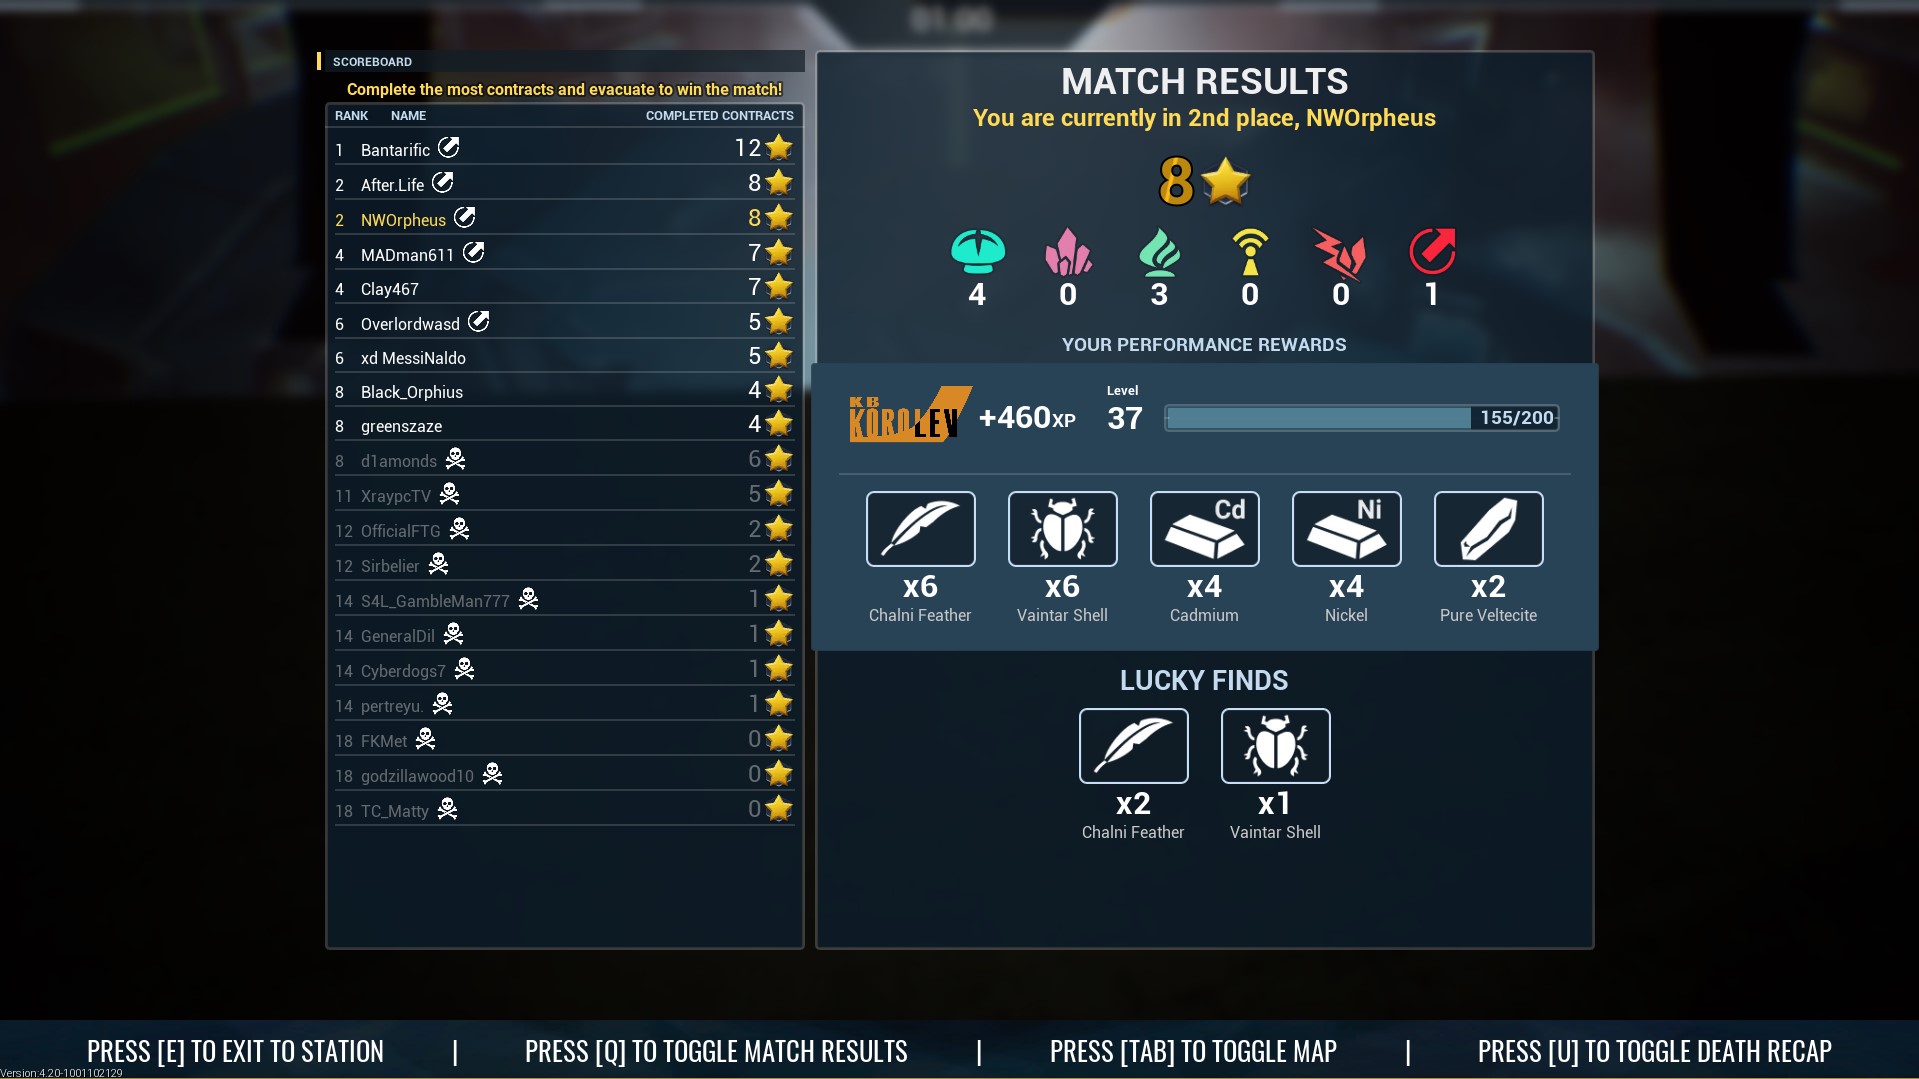 The Cycle Match Results Screenshot